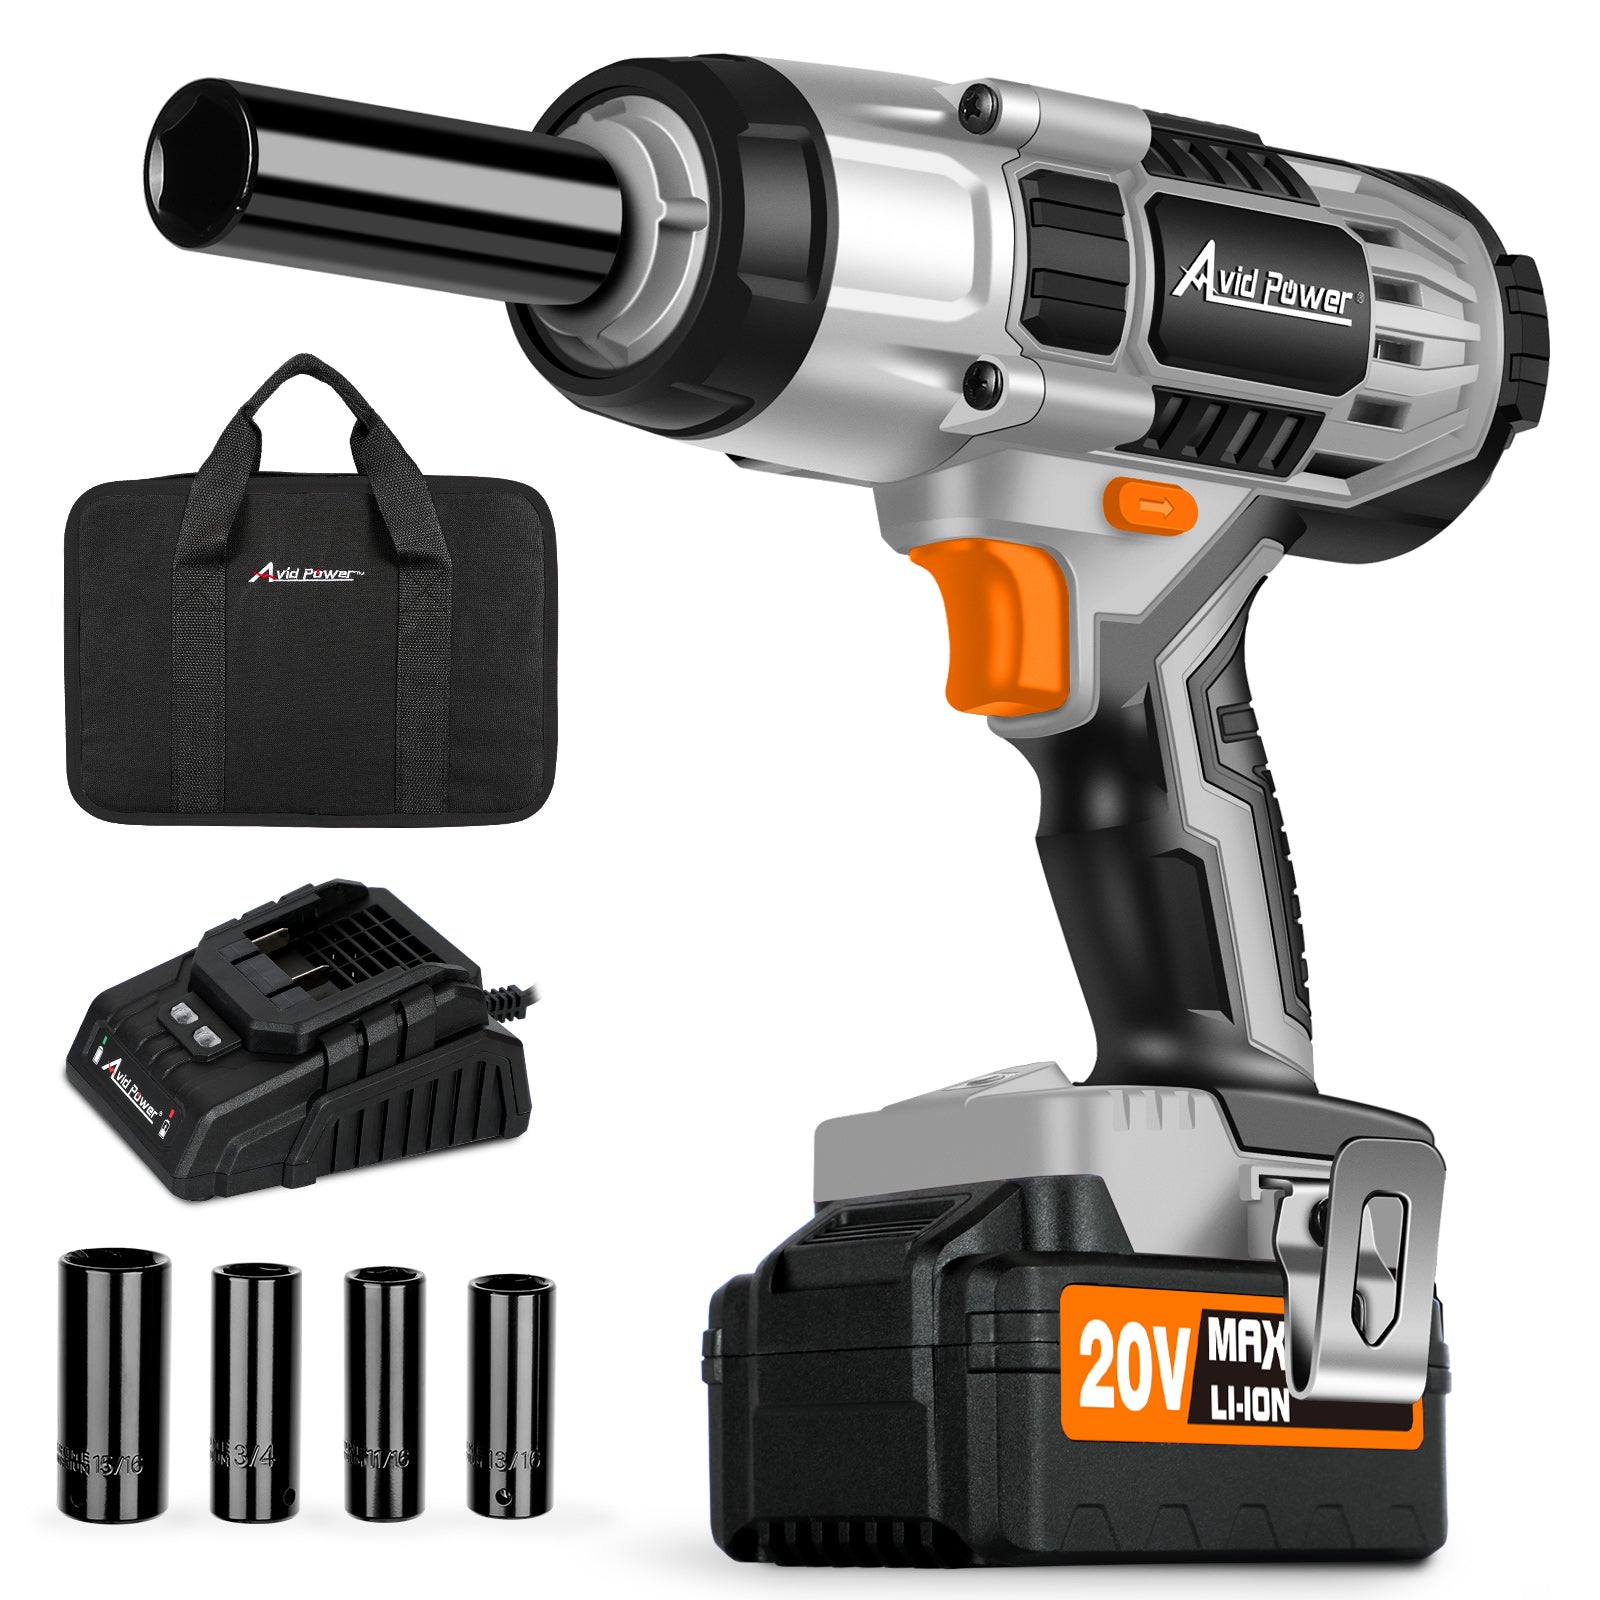 AVID POWER Impact Wrench 1/2” Drive w/Max Torque 330 ft-lbs (450N